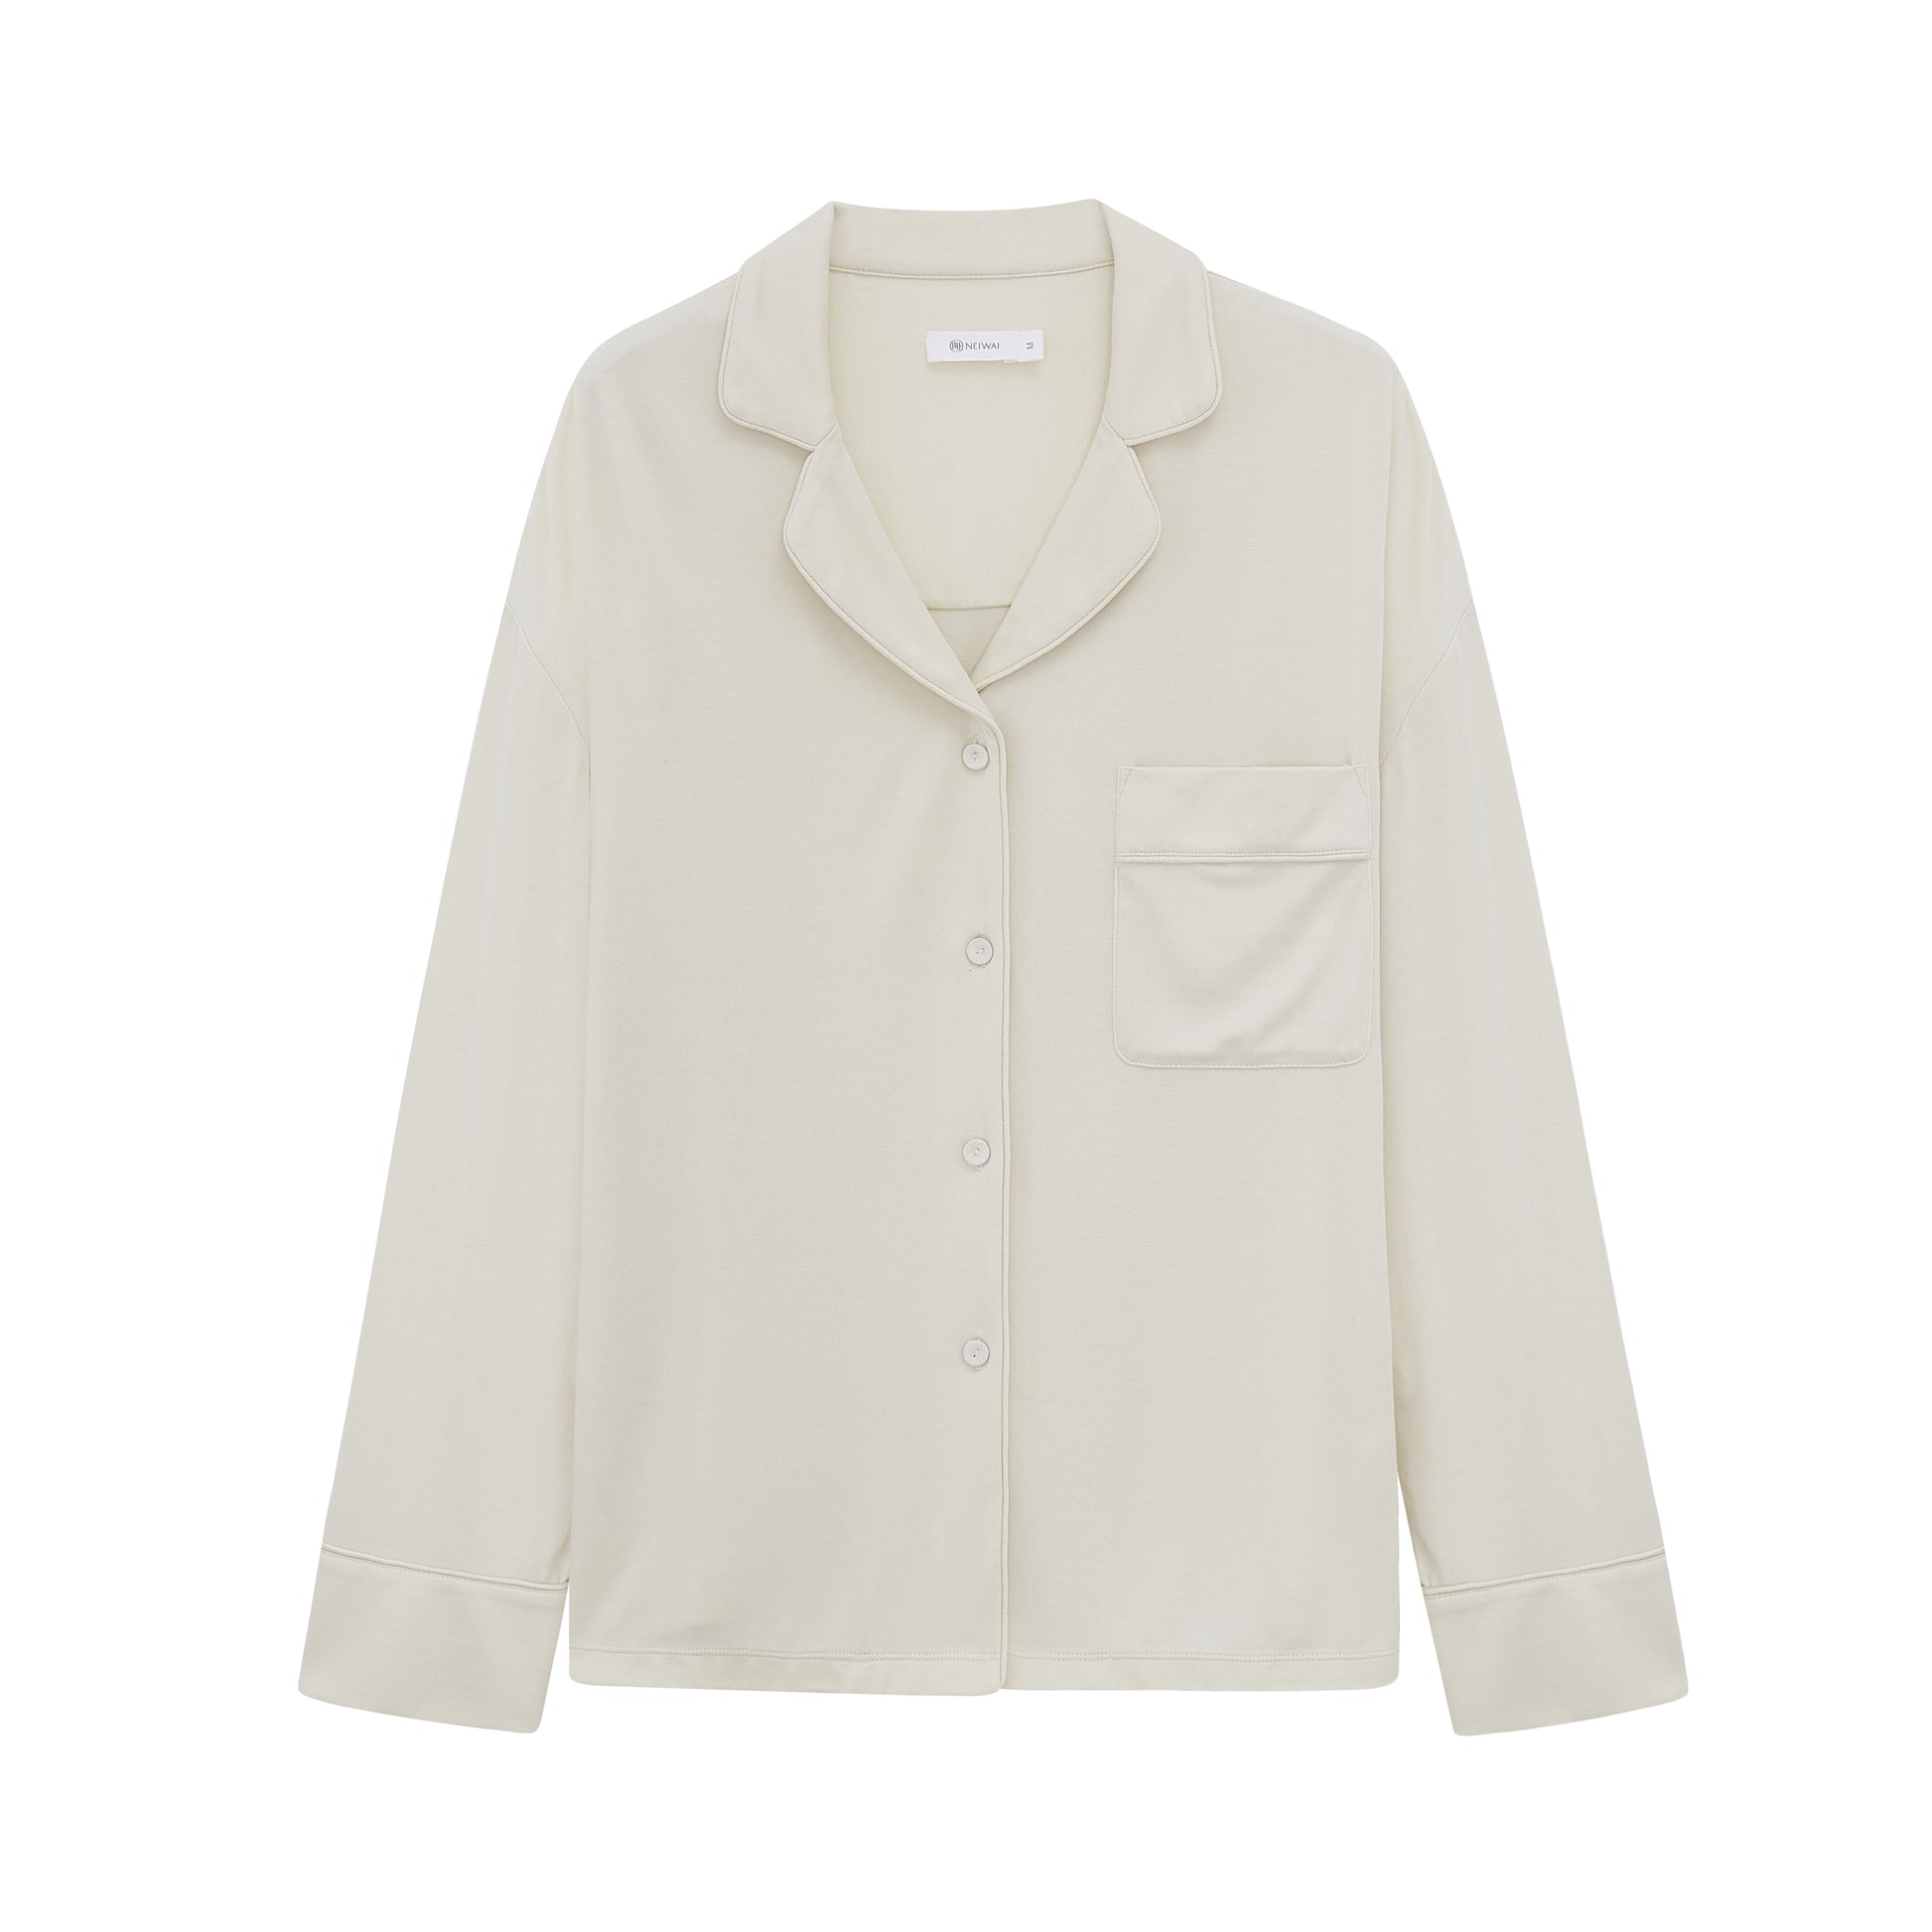 Flat lay image of off-white button up pajama shirt with pocket